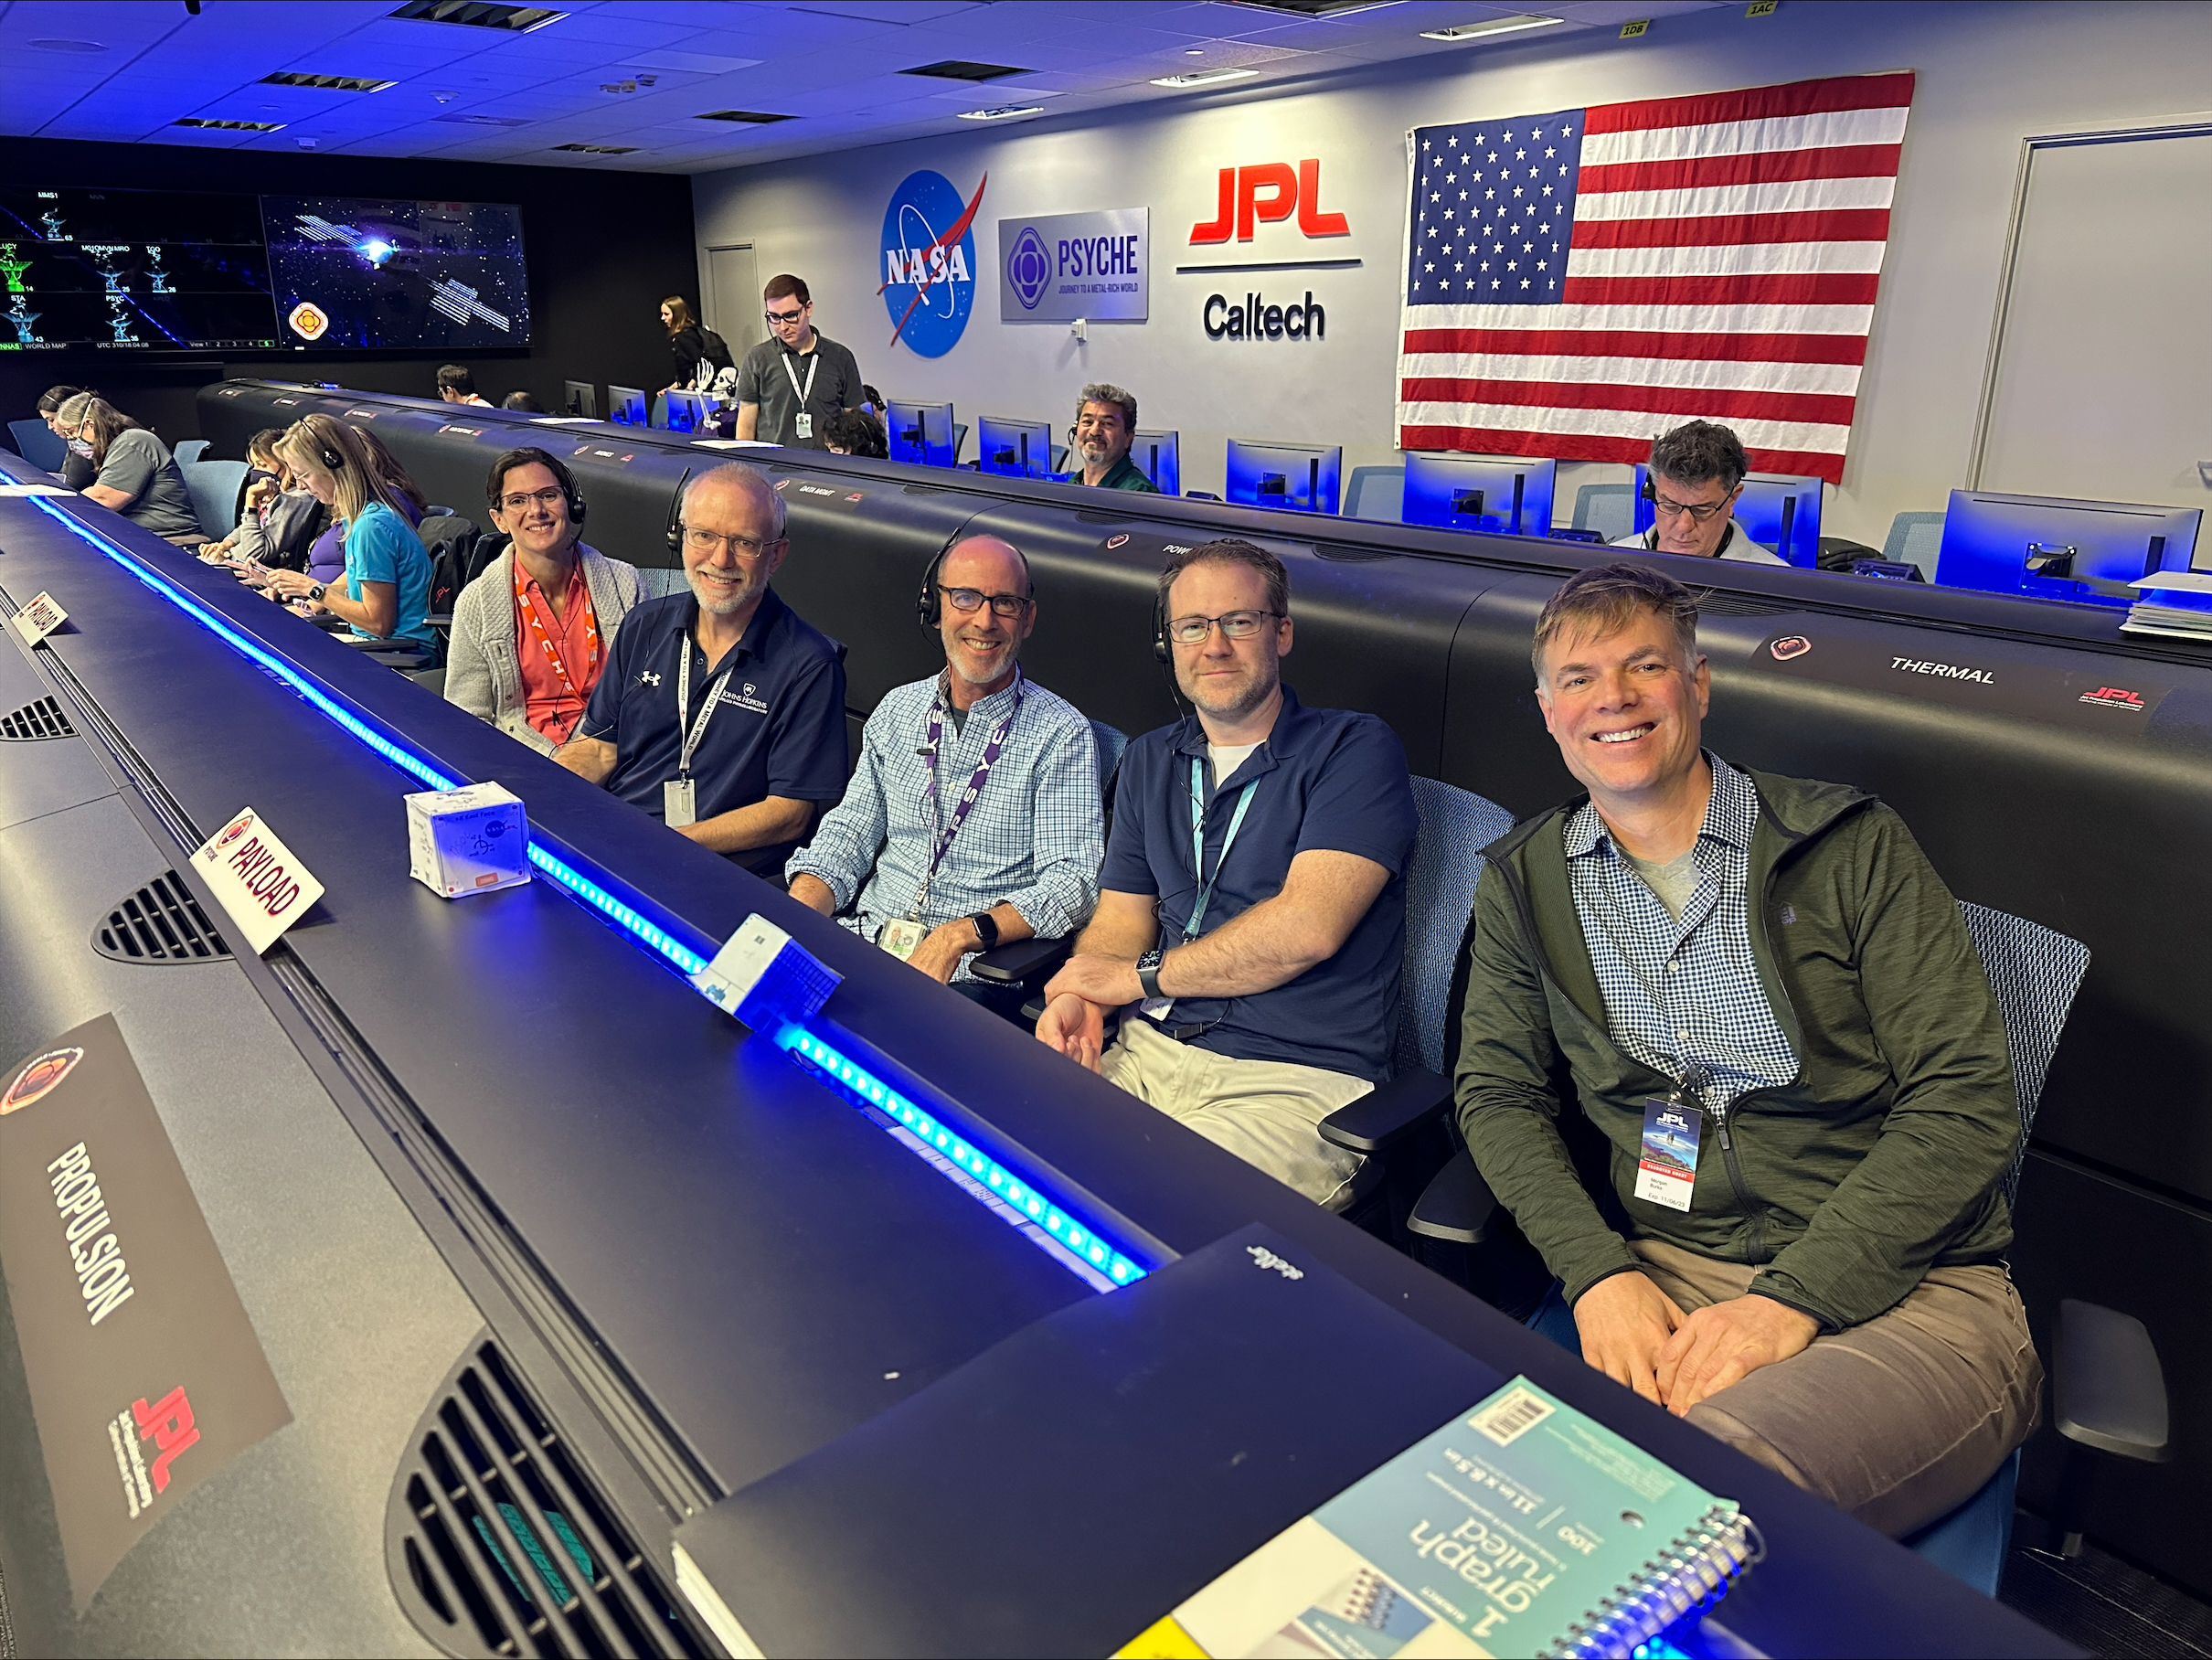 Several people sit behind a table with a blue neon light and an American flag, the NASA logo, the JPL logo and the Psyche mission logo are on the wall behind them